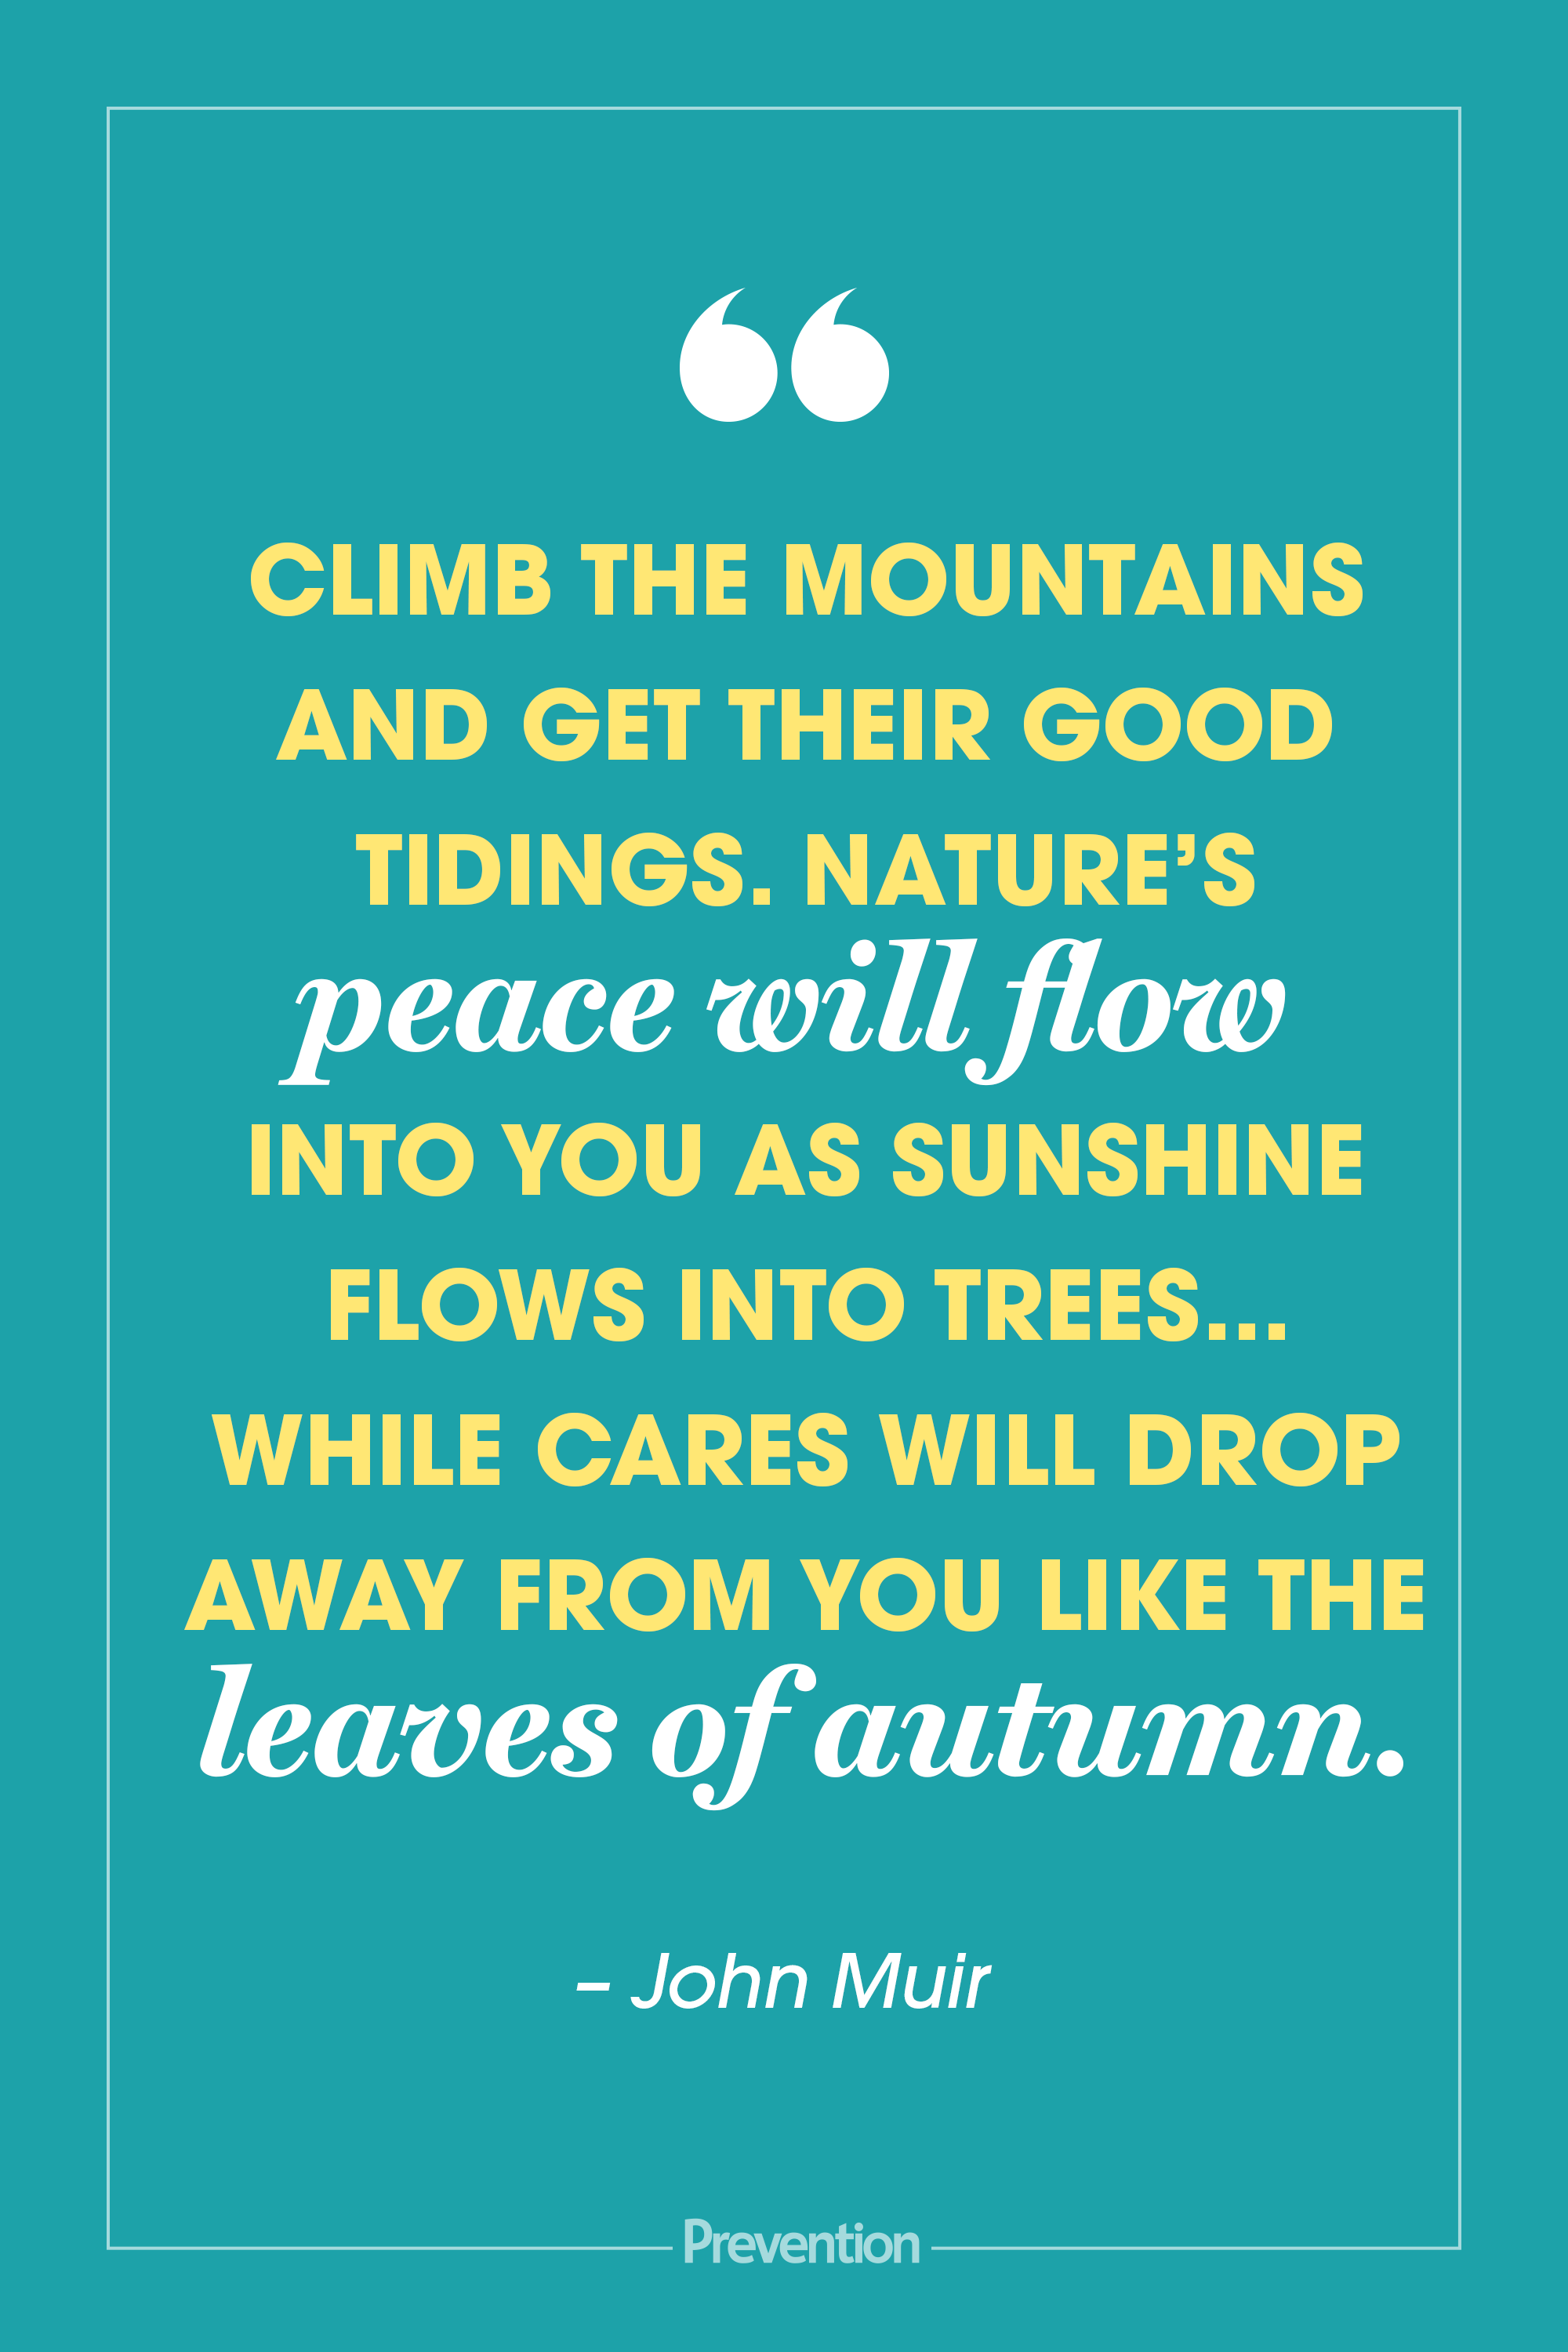 30+ Inspiring Fall Quotes - Best Quotes and Sayings About Autumn